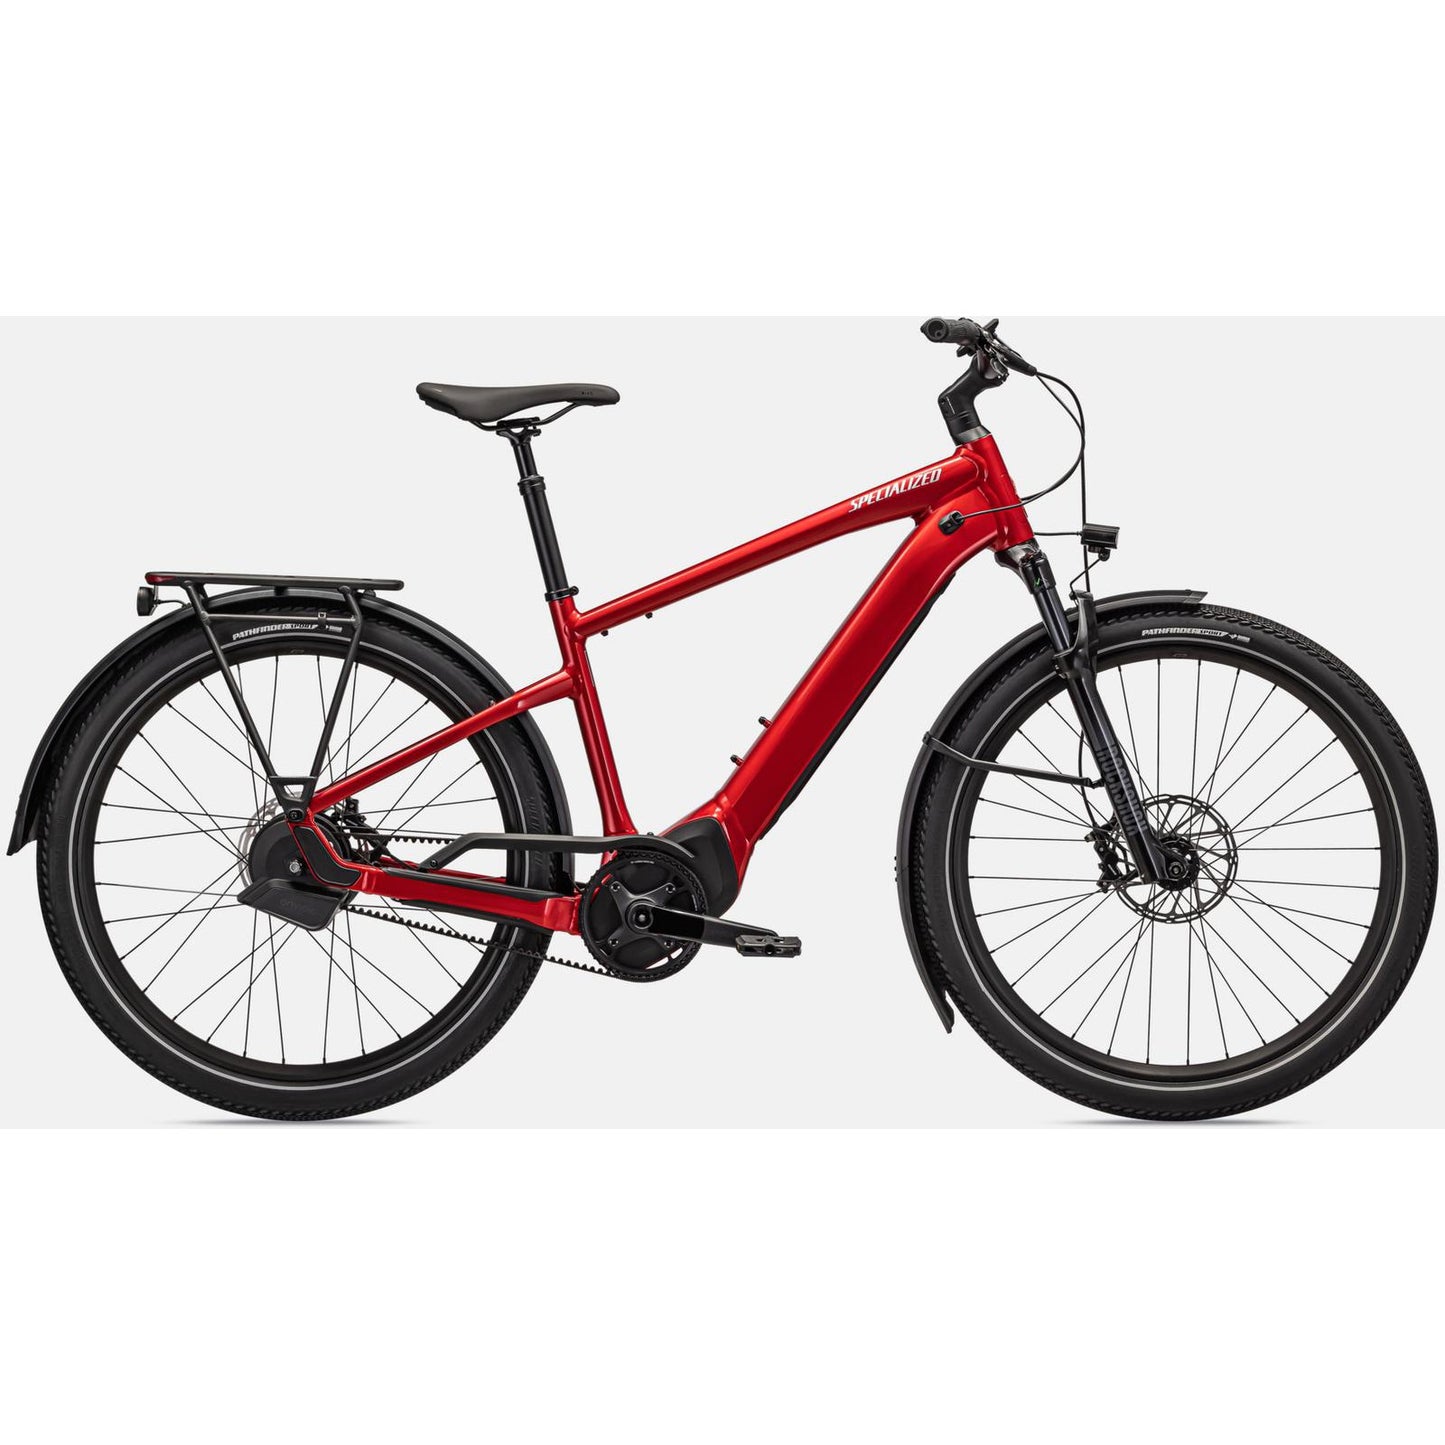 Specialized Turbo Vado 5.0 IGH Electric Bike 2023 - Bikes - Bicycle Warehouse